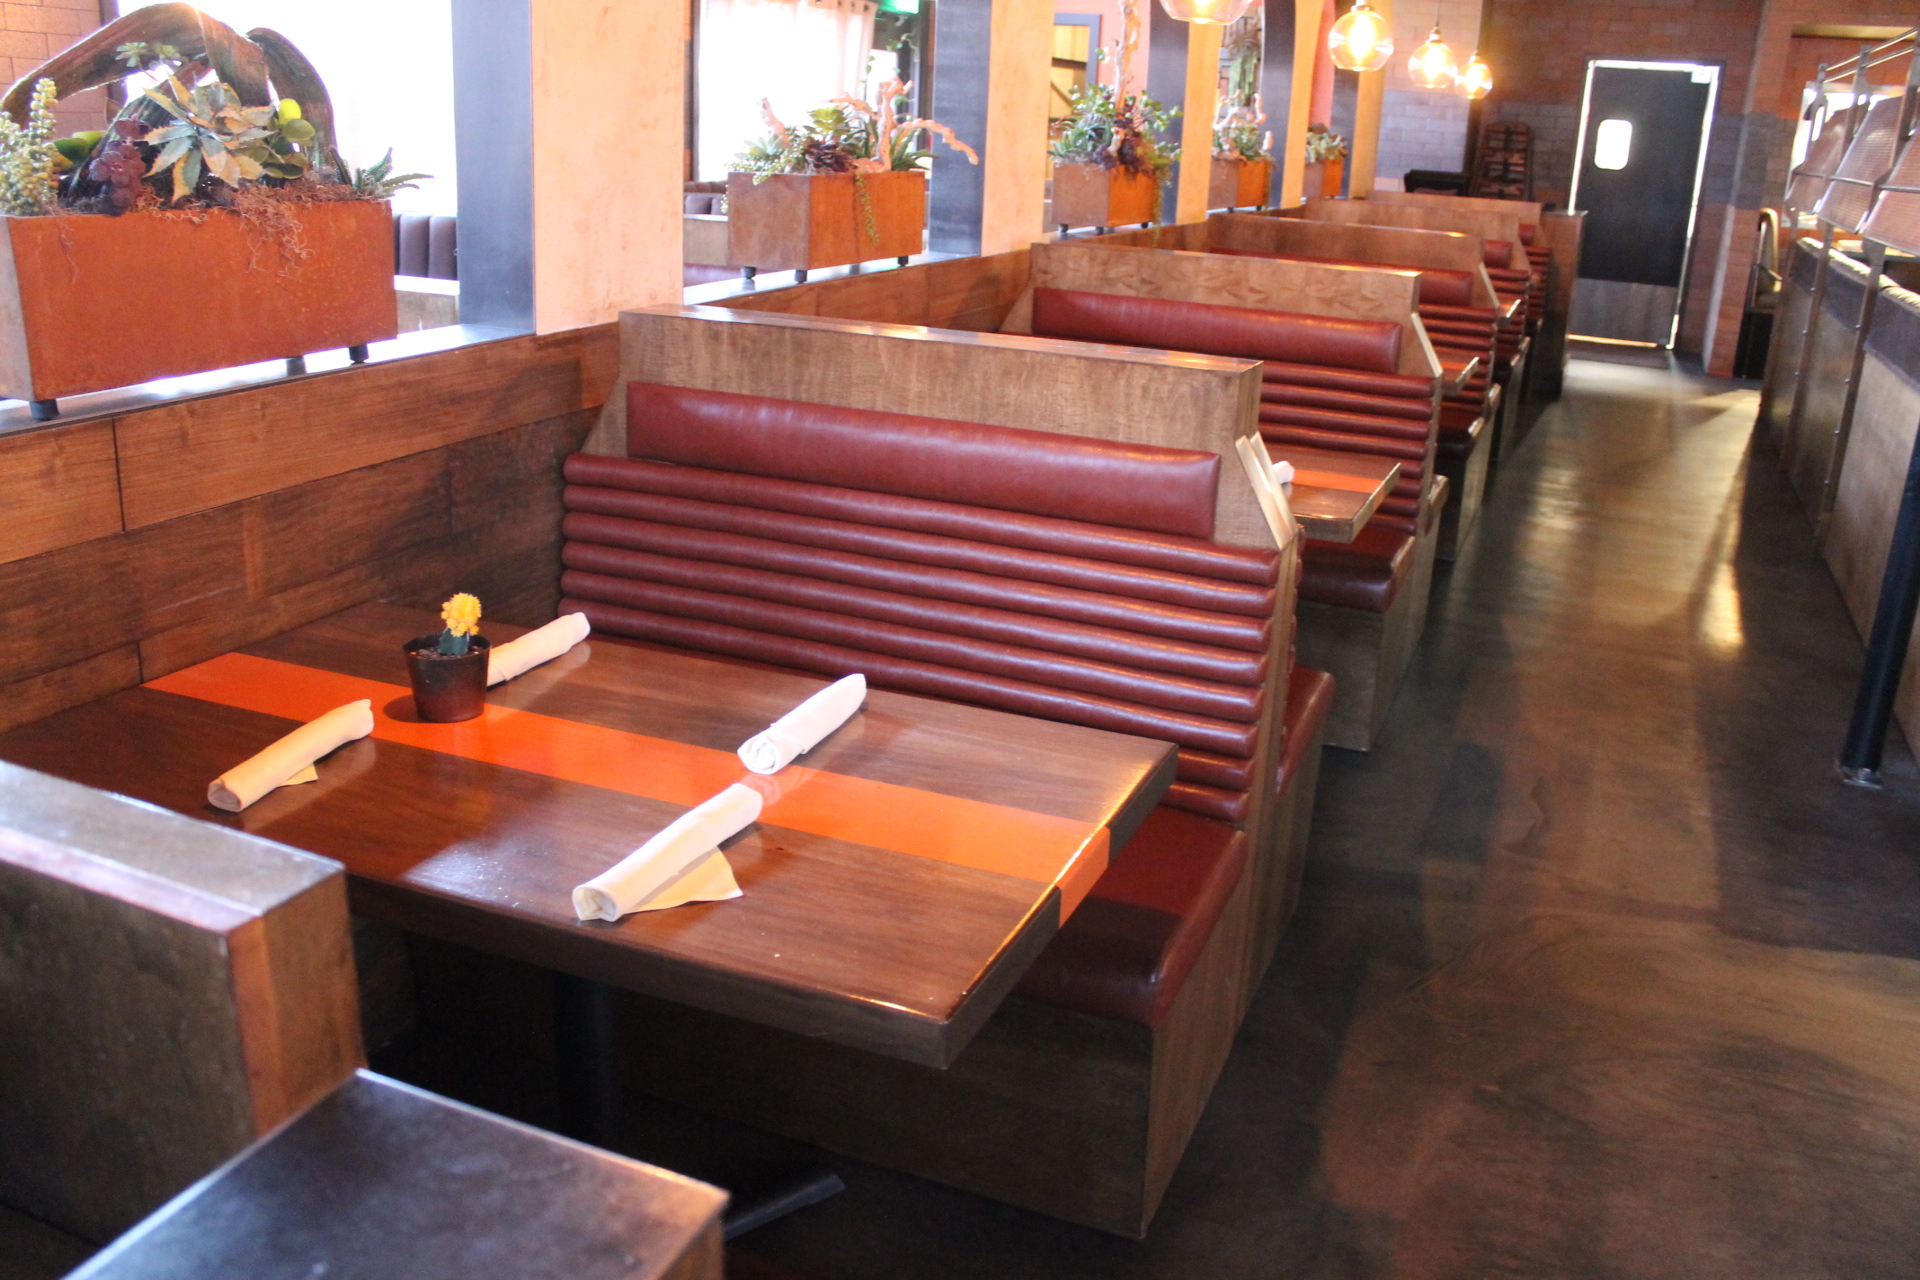 A leader in restaurant furniture upholstery and restaurant bench fabrication.